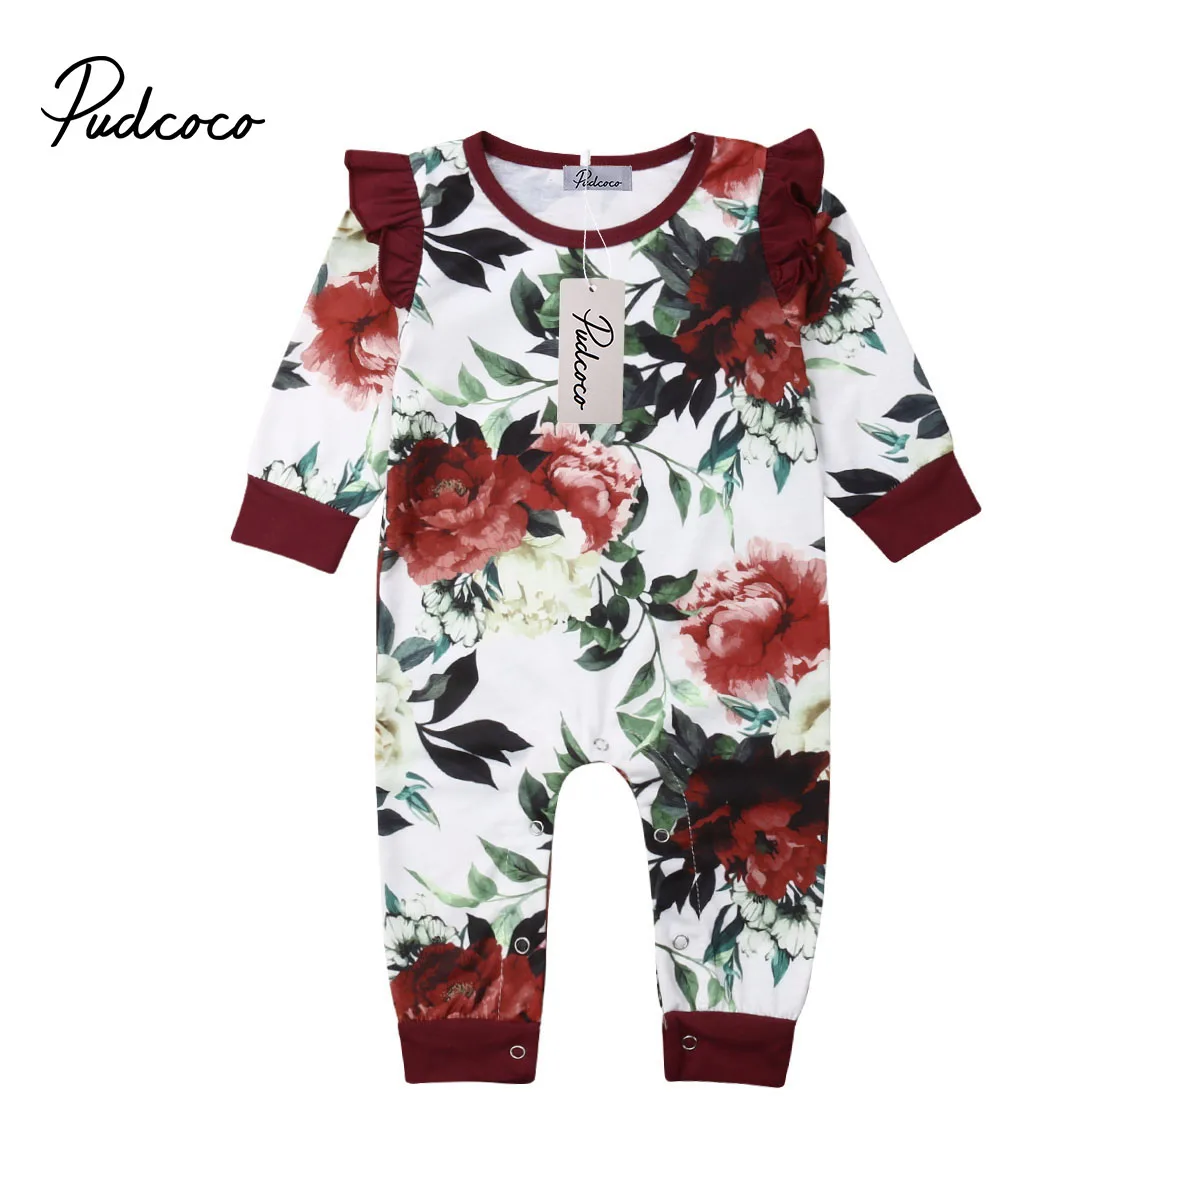 Toddler Baby Girl Flower Print Romper Jumpsuit+Leg Warmer Outfit 2Pc Set Clothes